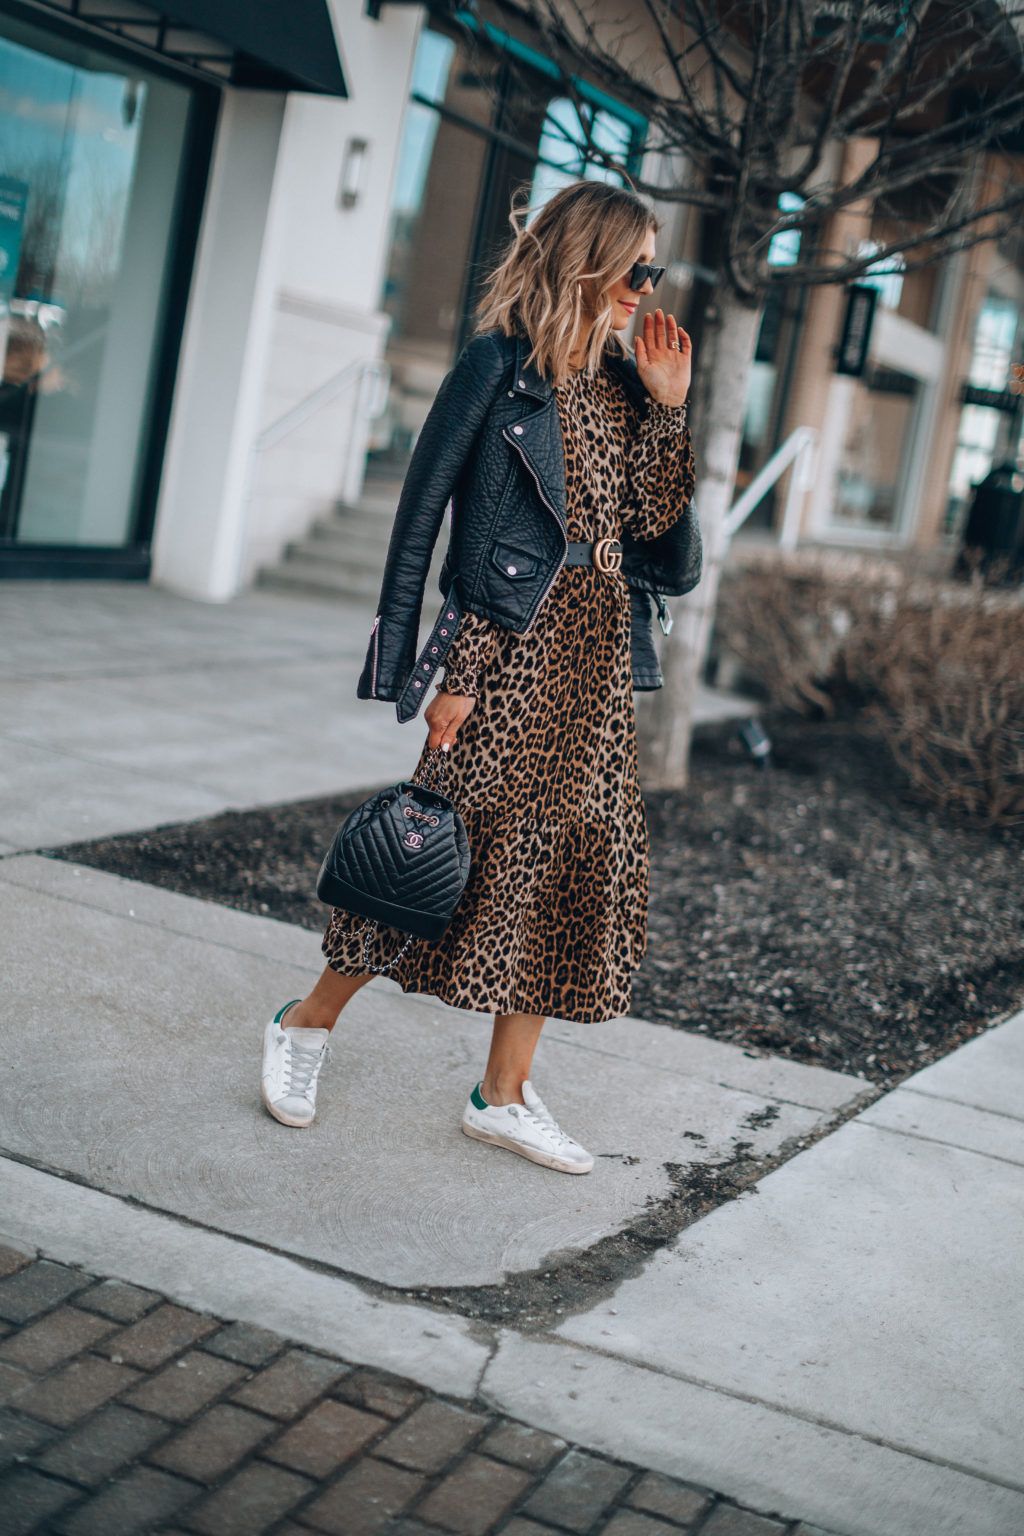 Go gorgeous with awesome leopard dress